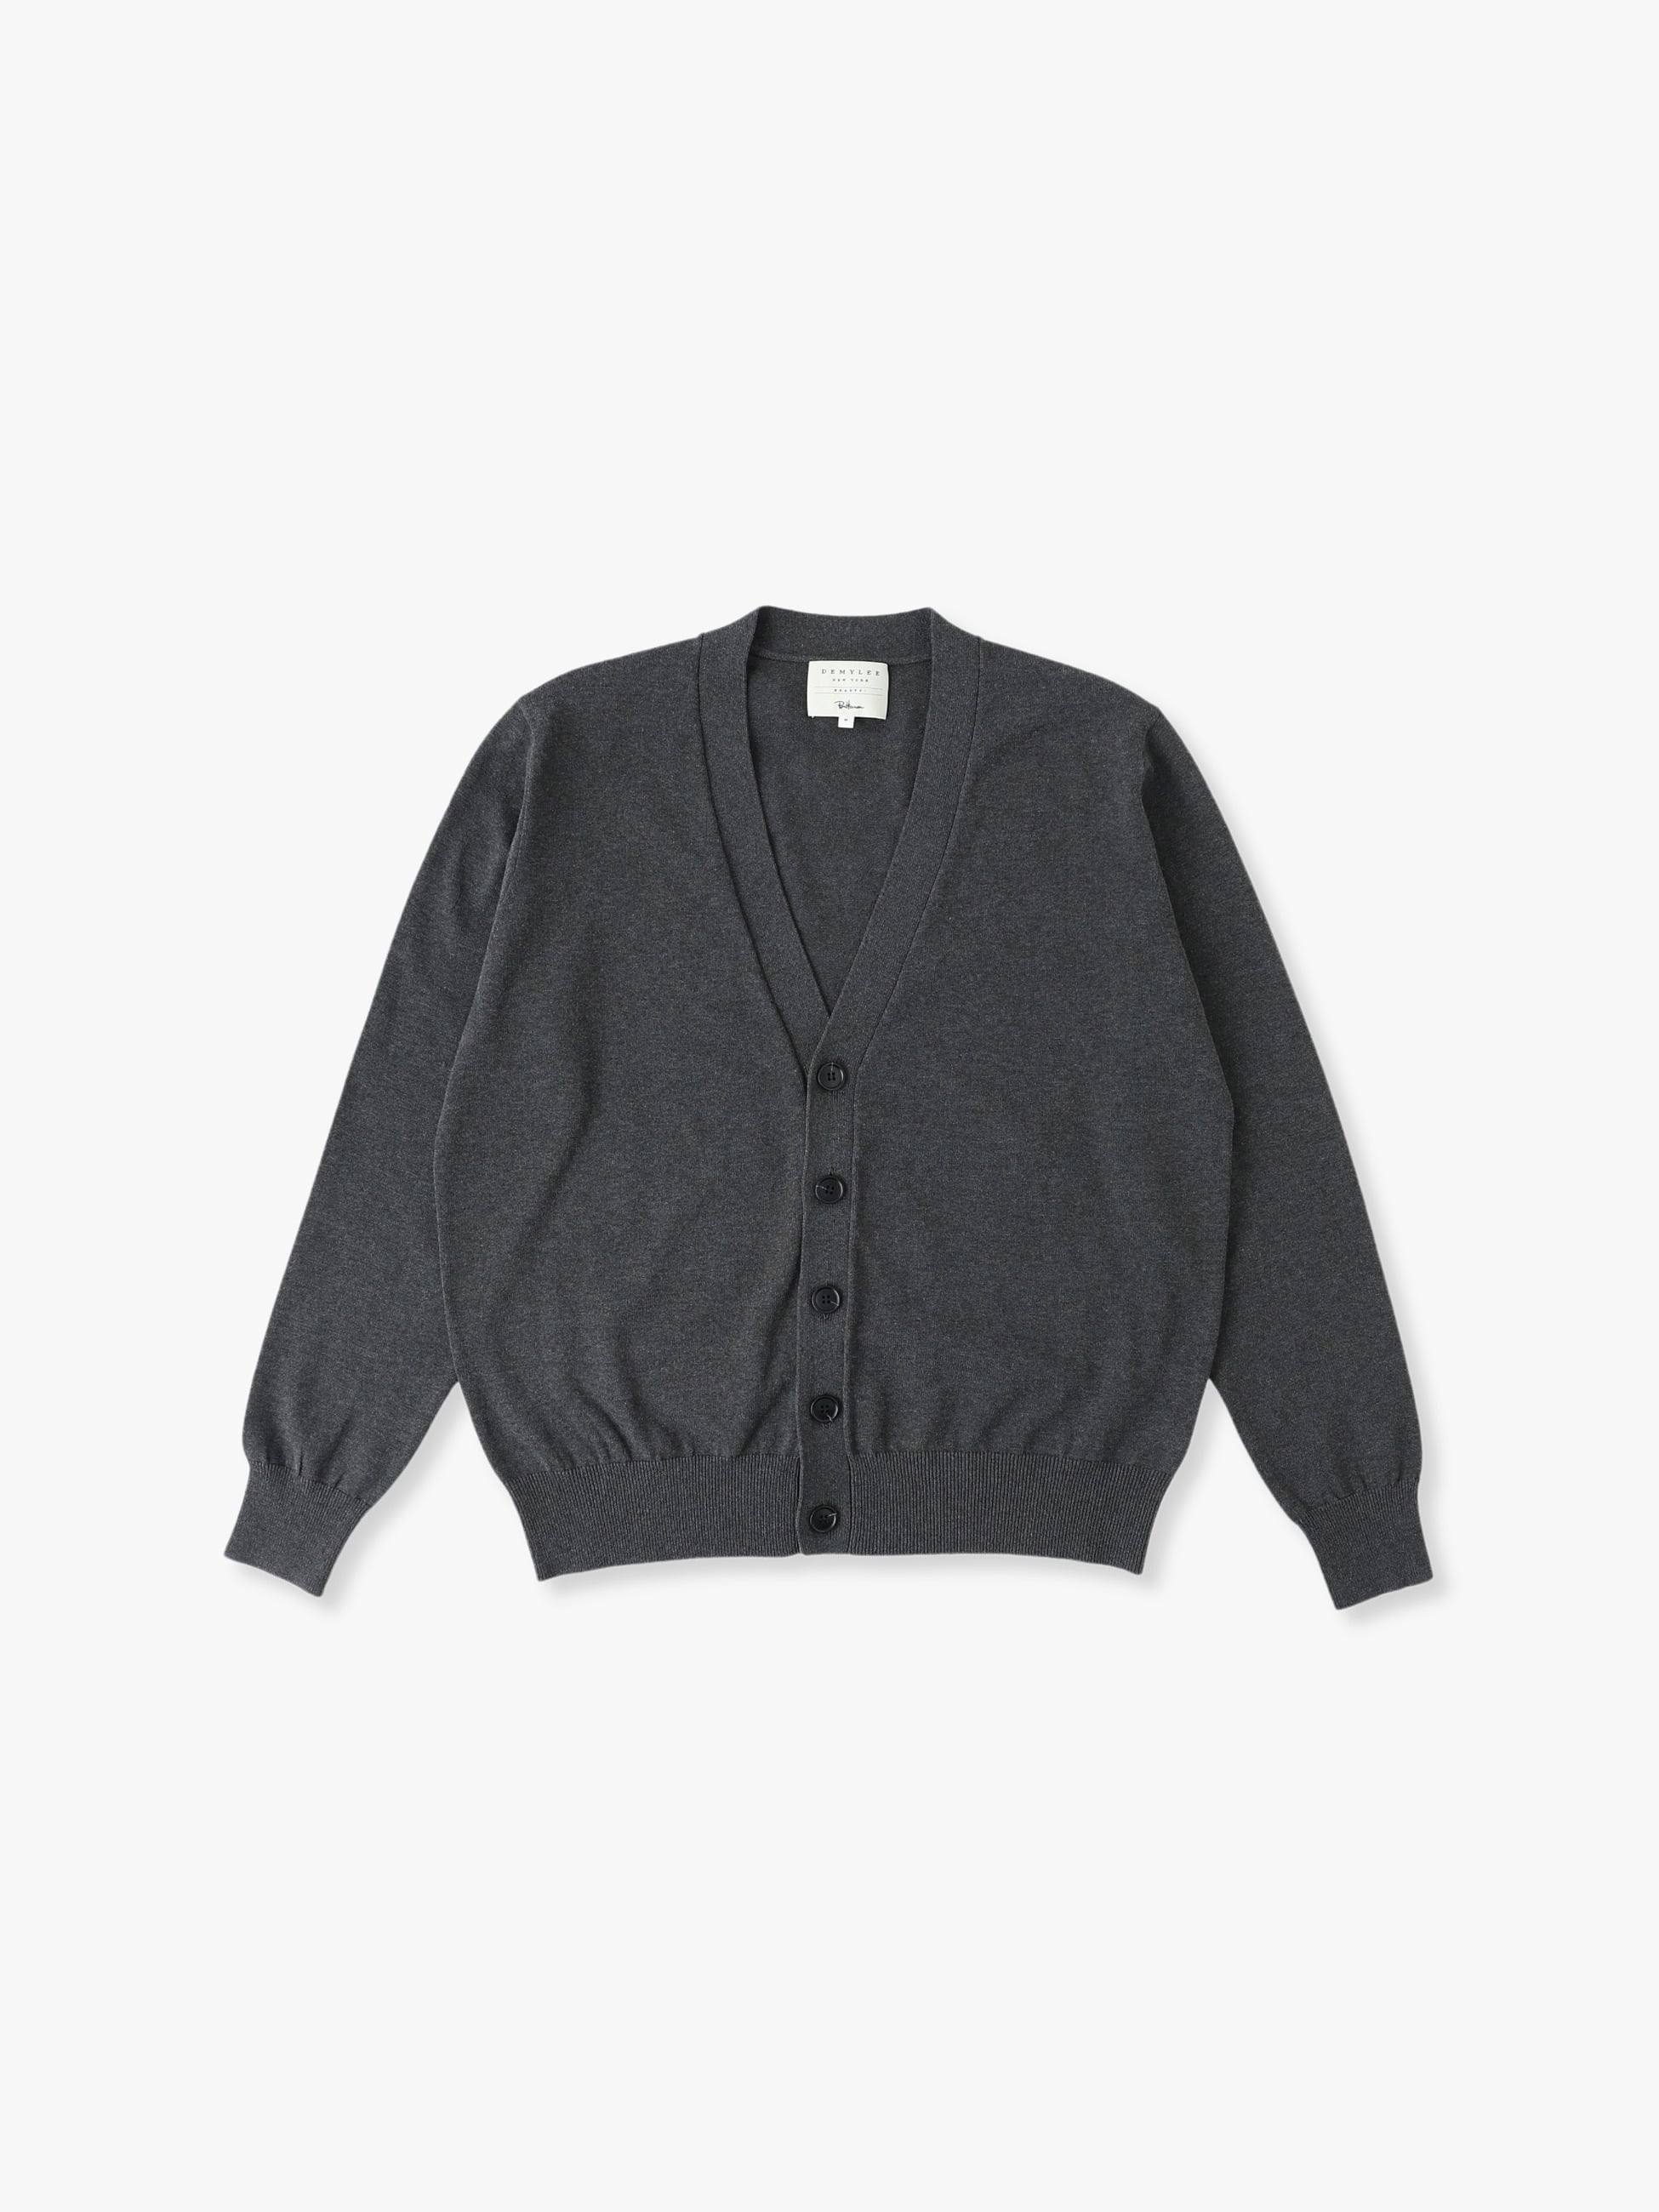 High Twisted Cotton Knit Cardigan 詳細画像 charcoal gray 2